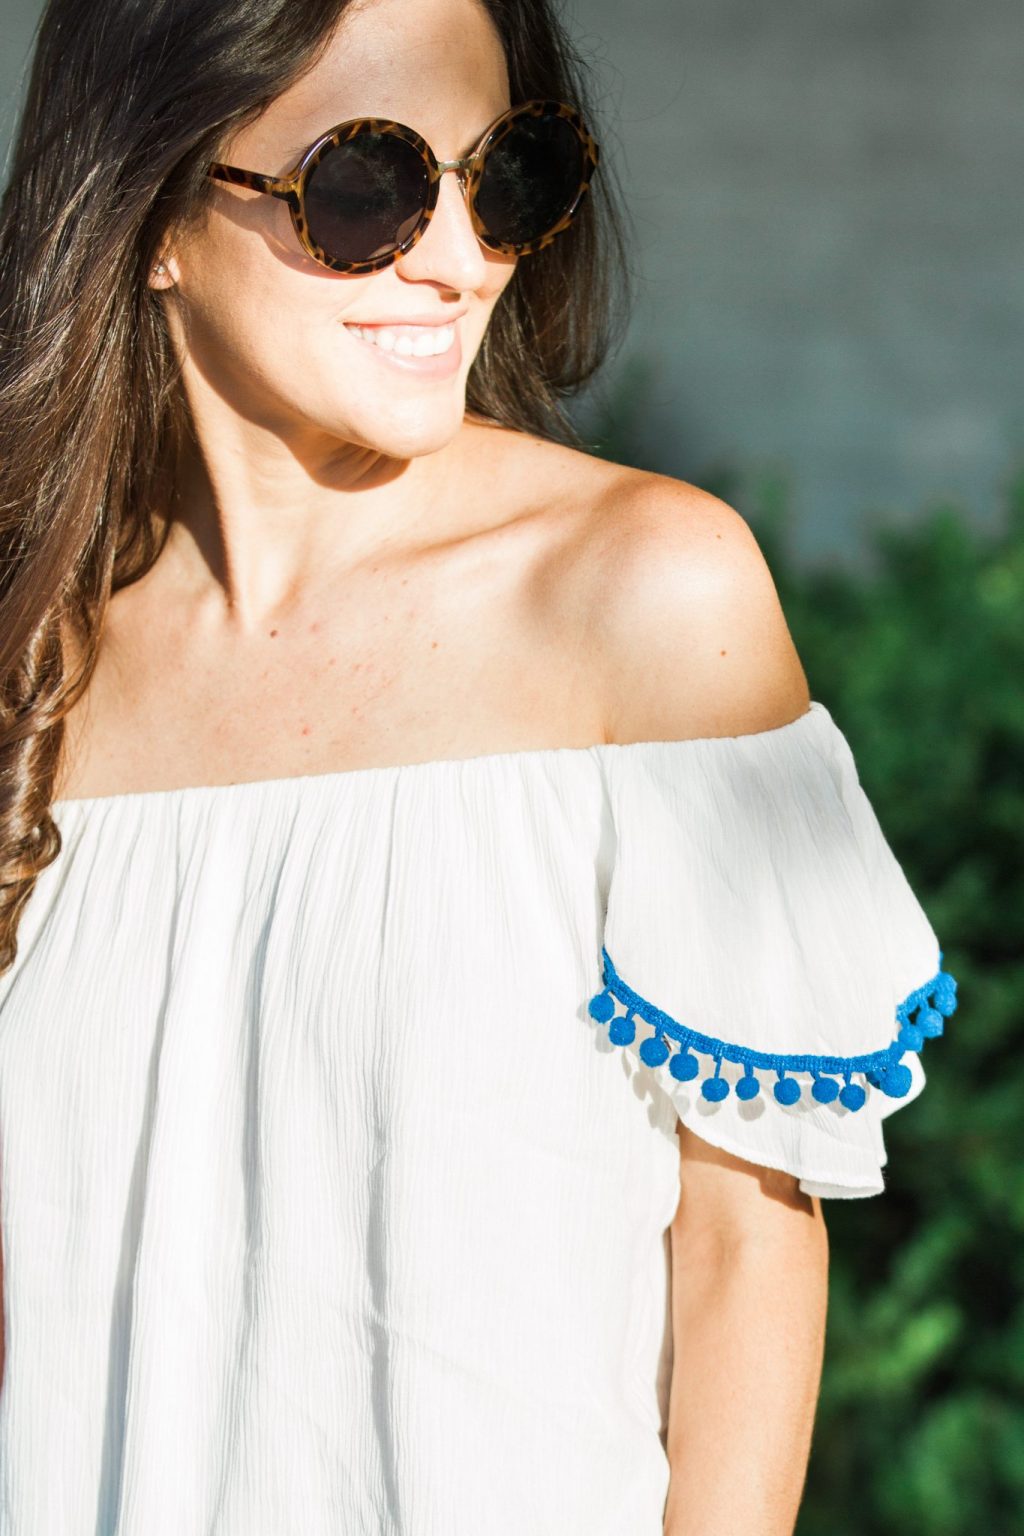 poms, off the shoulder, summer style, casual style